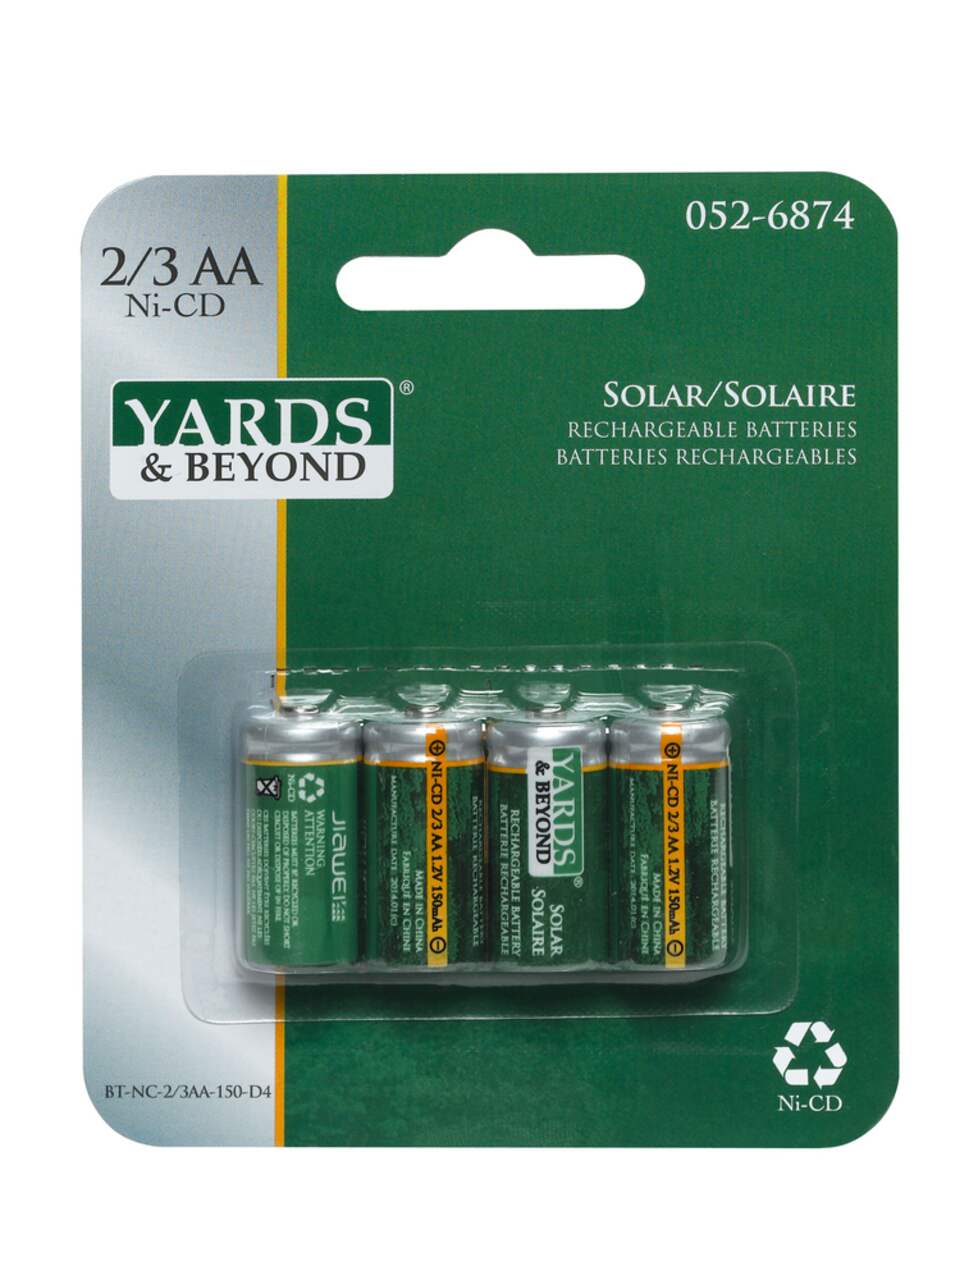 https://media-www.canadiantire.ca/product/seasonal-gardening/backyard-living/outdoor-lighting/0526874/solar-batteries-2-3-aa-4-pack-noma-68ece467-9731-4655-8d10-432e7fb12e99.png?imdensity=1&imwidth=640&impolicy=mZoom